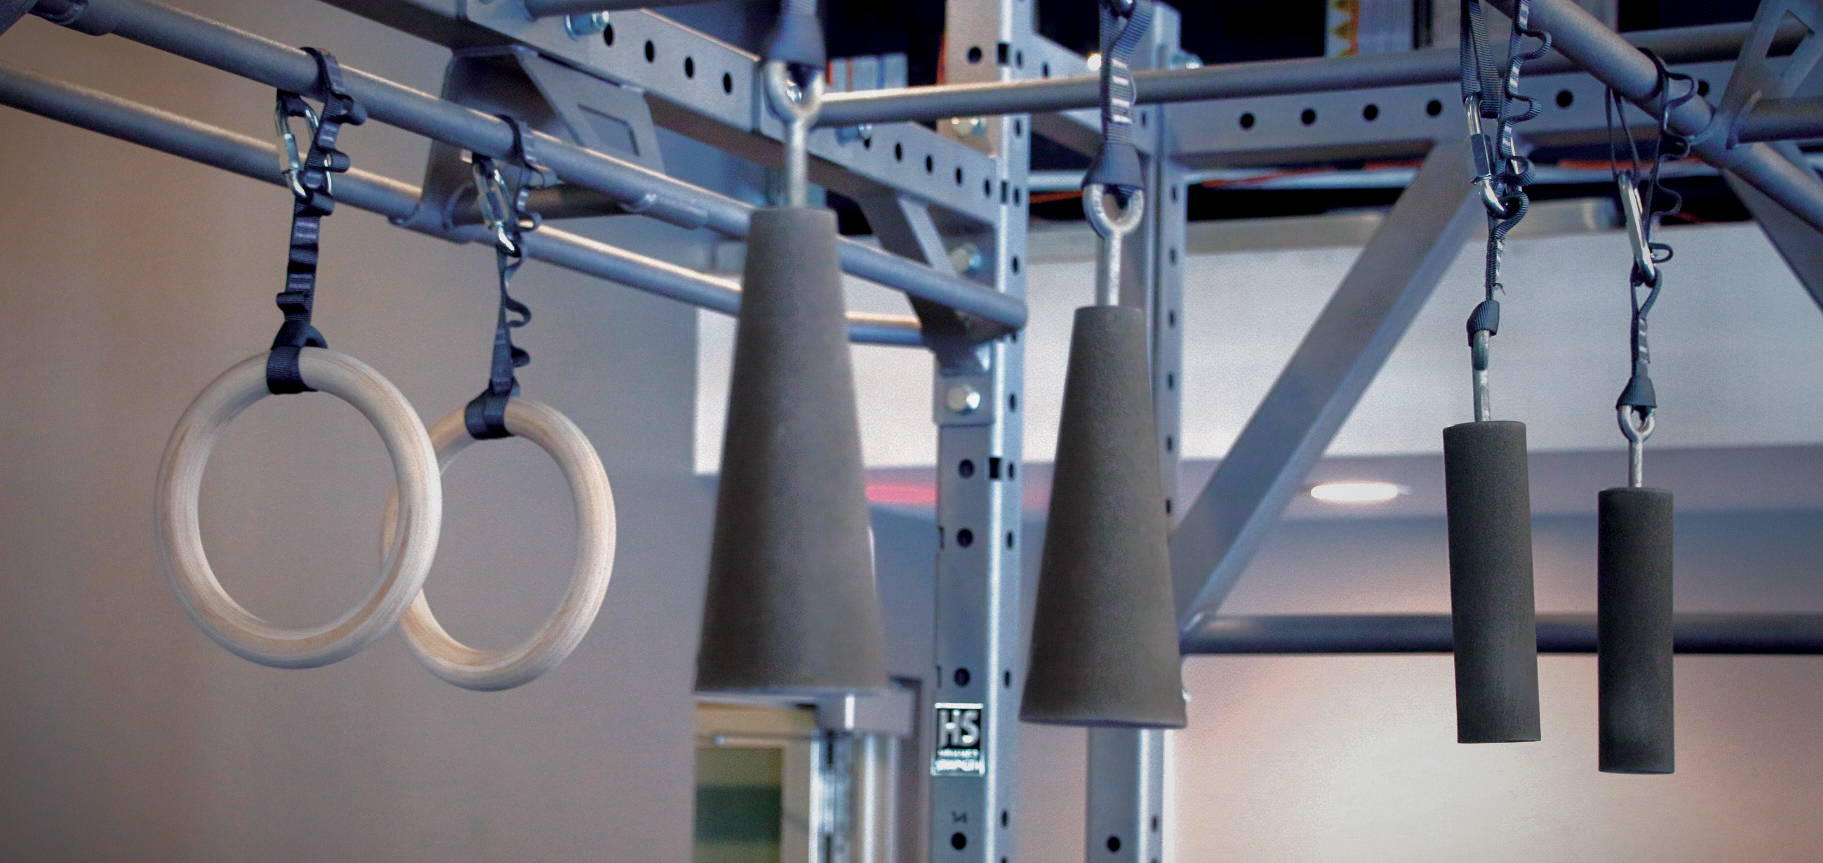 Hanging accessories suspended from Hammer Strength rack: Olympic rings, cones, pipe set